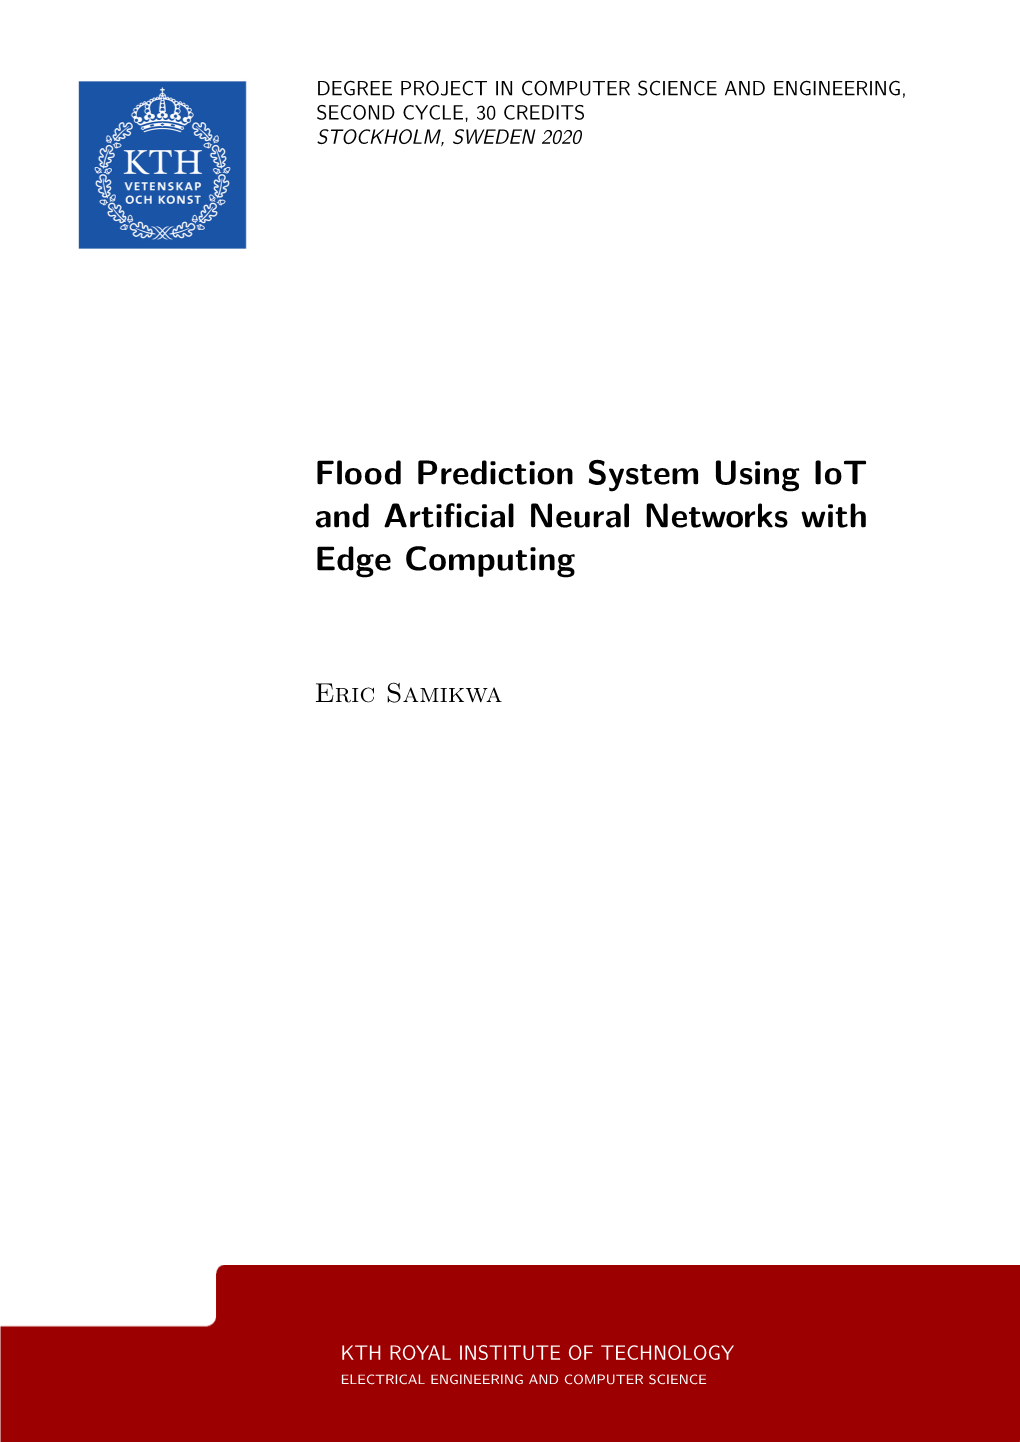 Flood Prediction System Using Iot and Artificial Neural Networks with Edge Computing